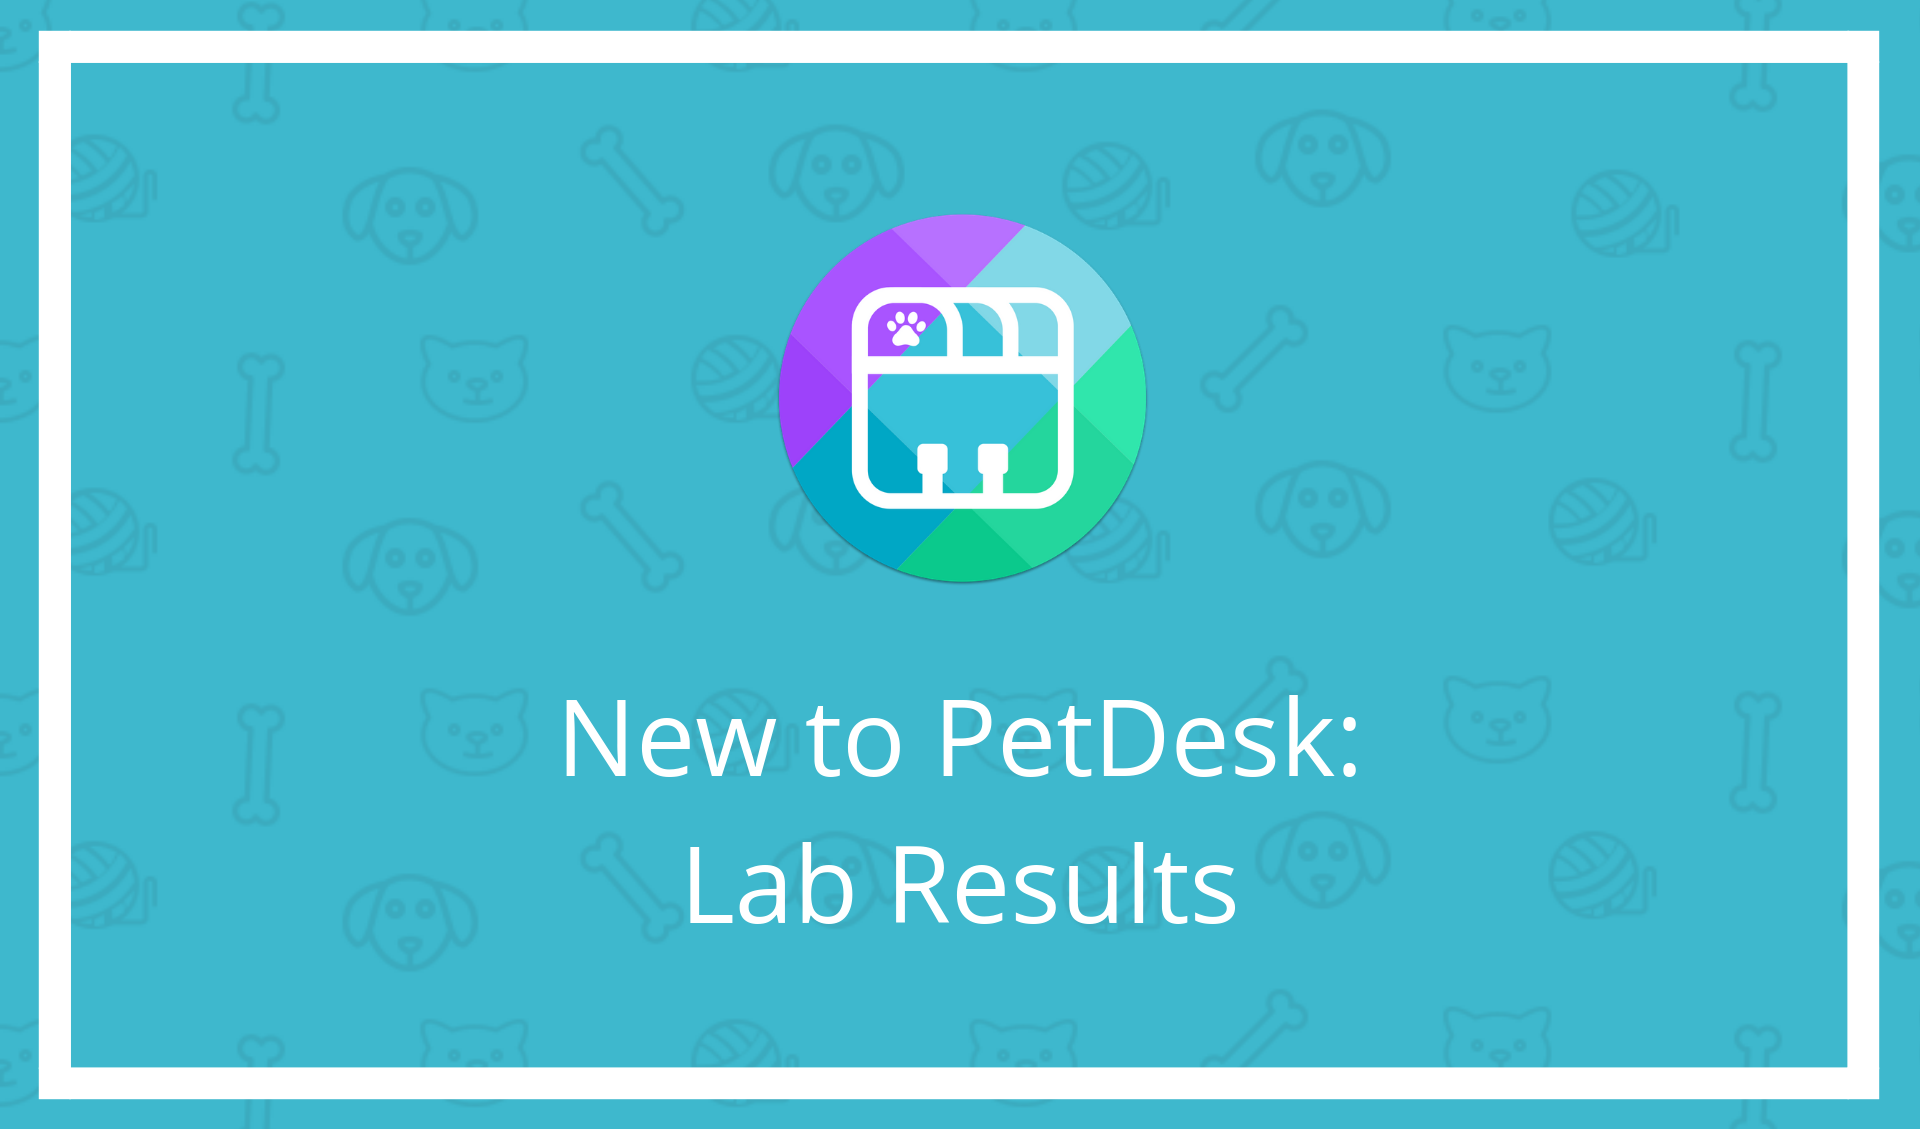 New to PetDesk: Lab Results